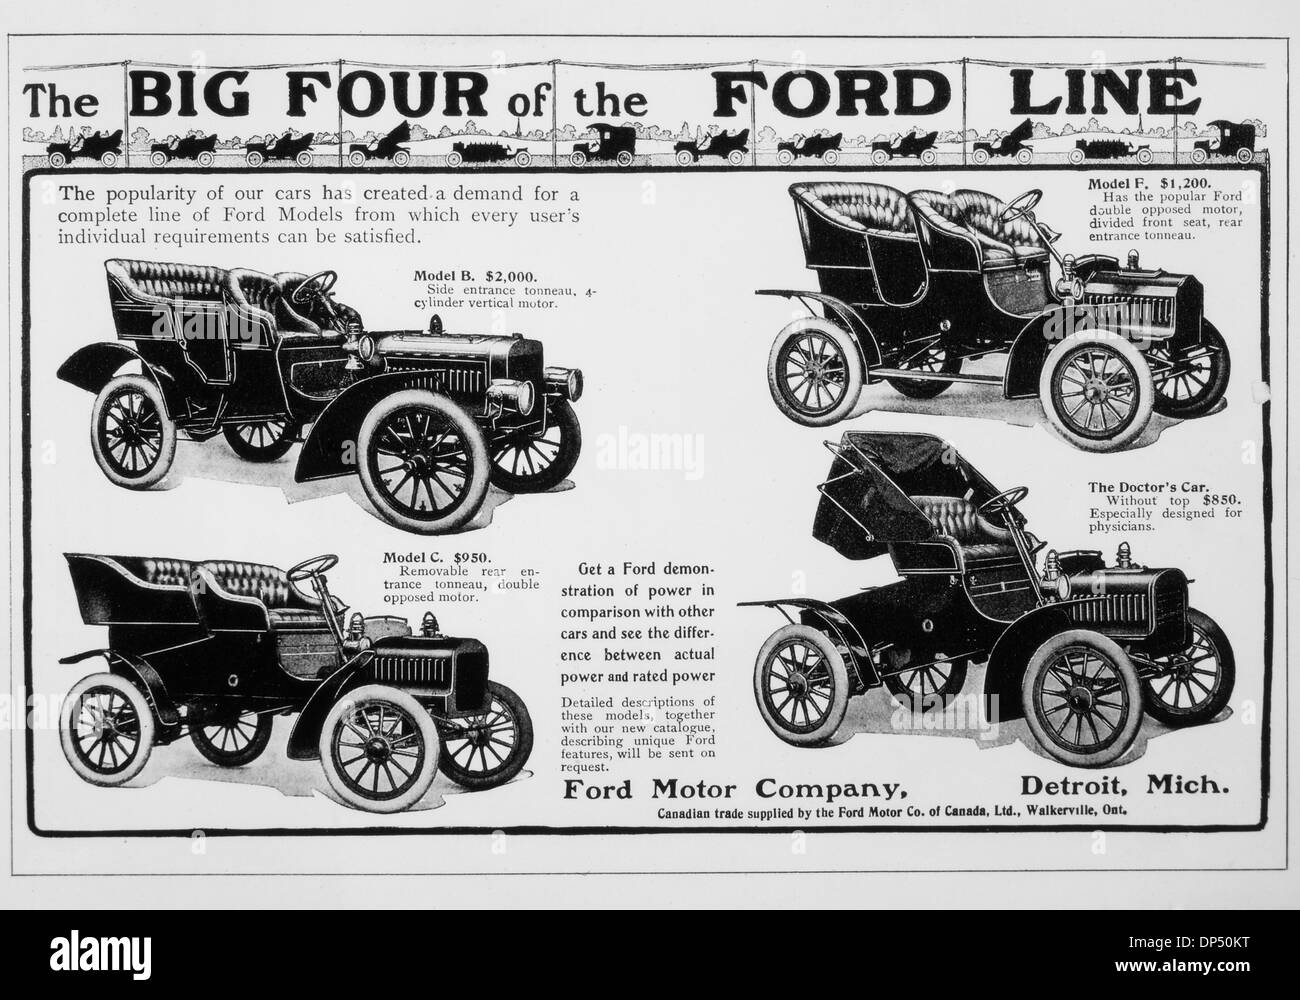 Ford Motor Company Vintage Advertisement Featuring the Big Four Automobiles, circa 1909 Stock Photo